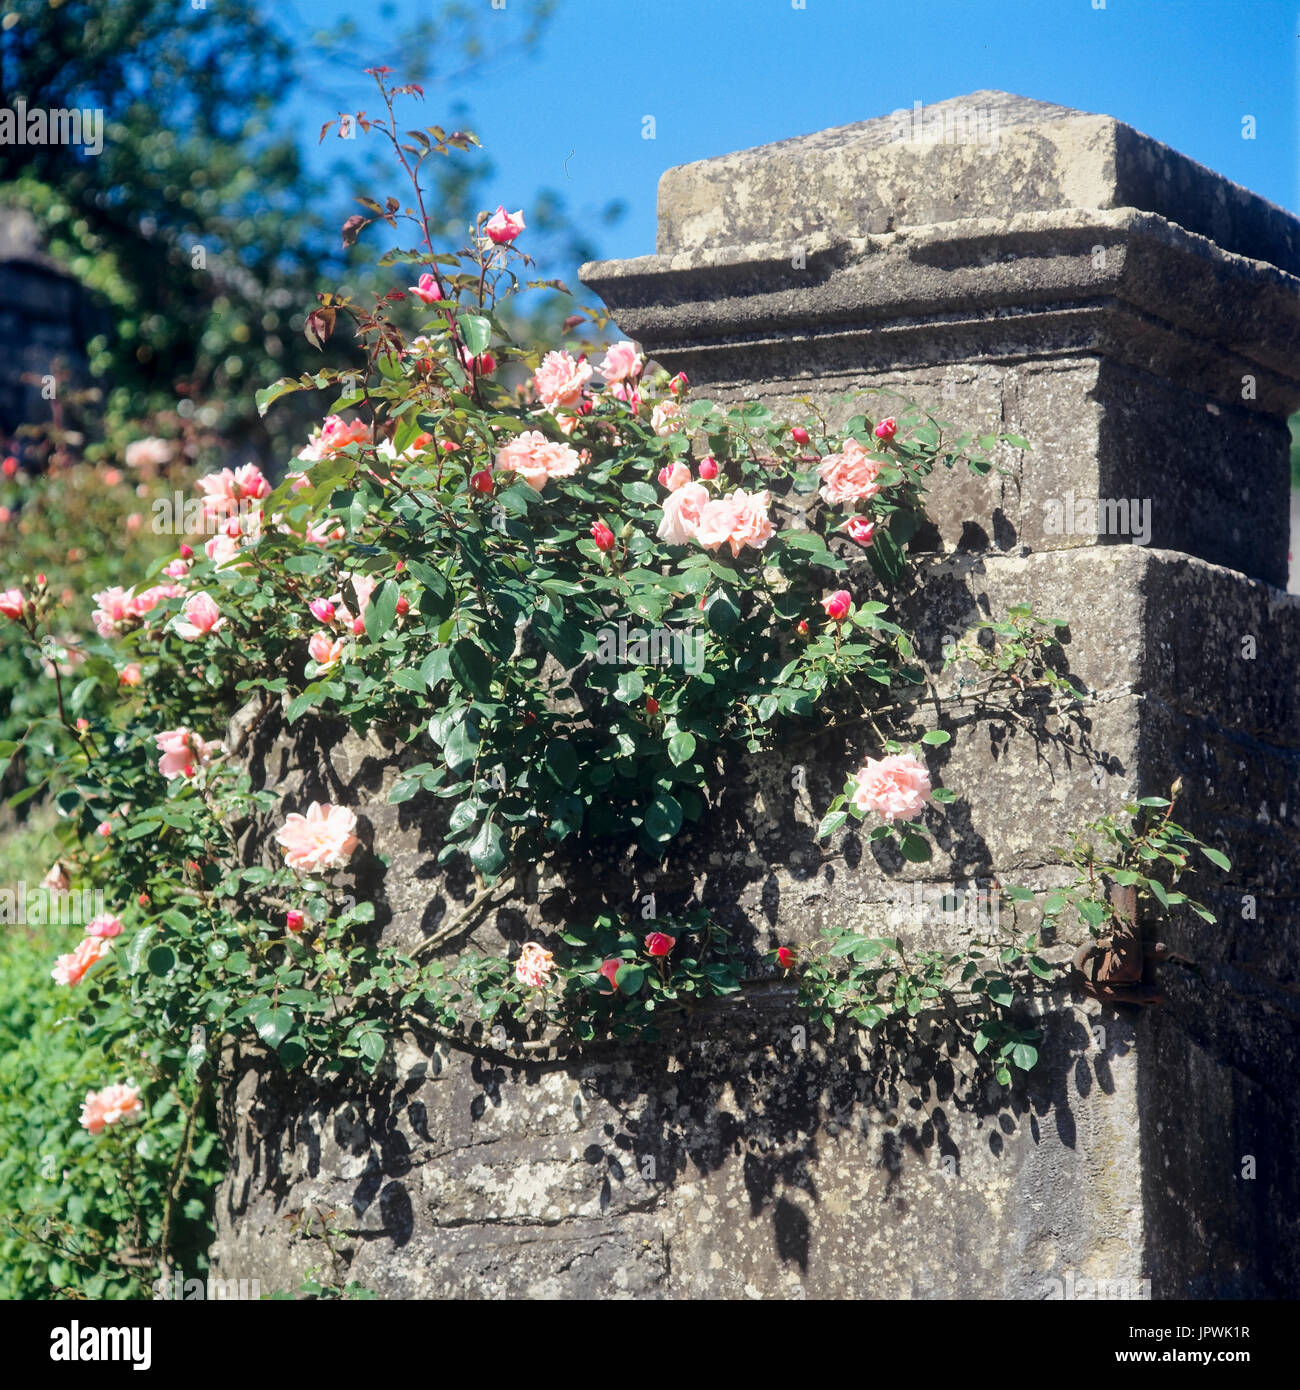 Flowers on stone wall Stock Photo